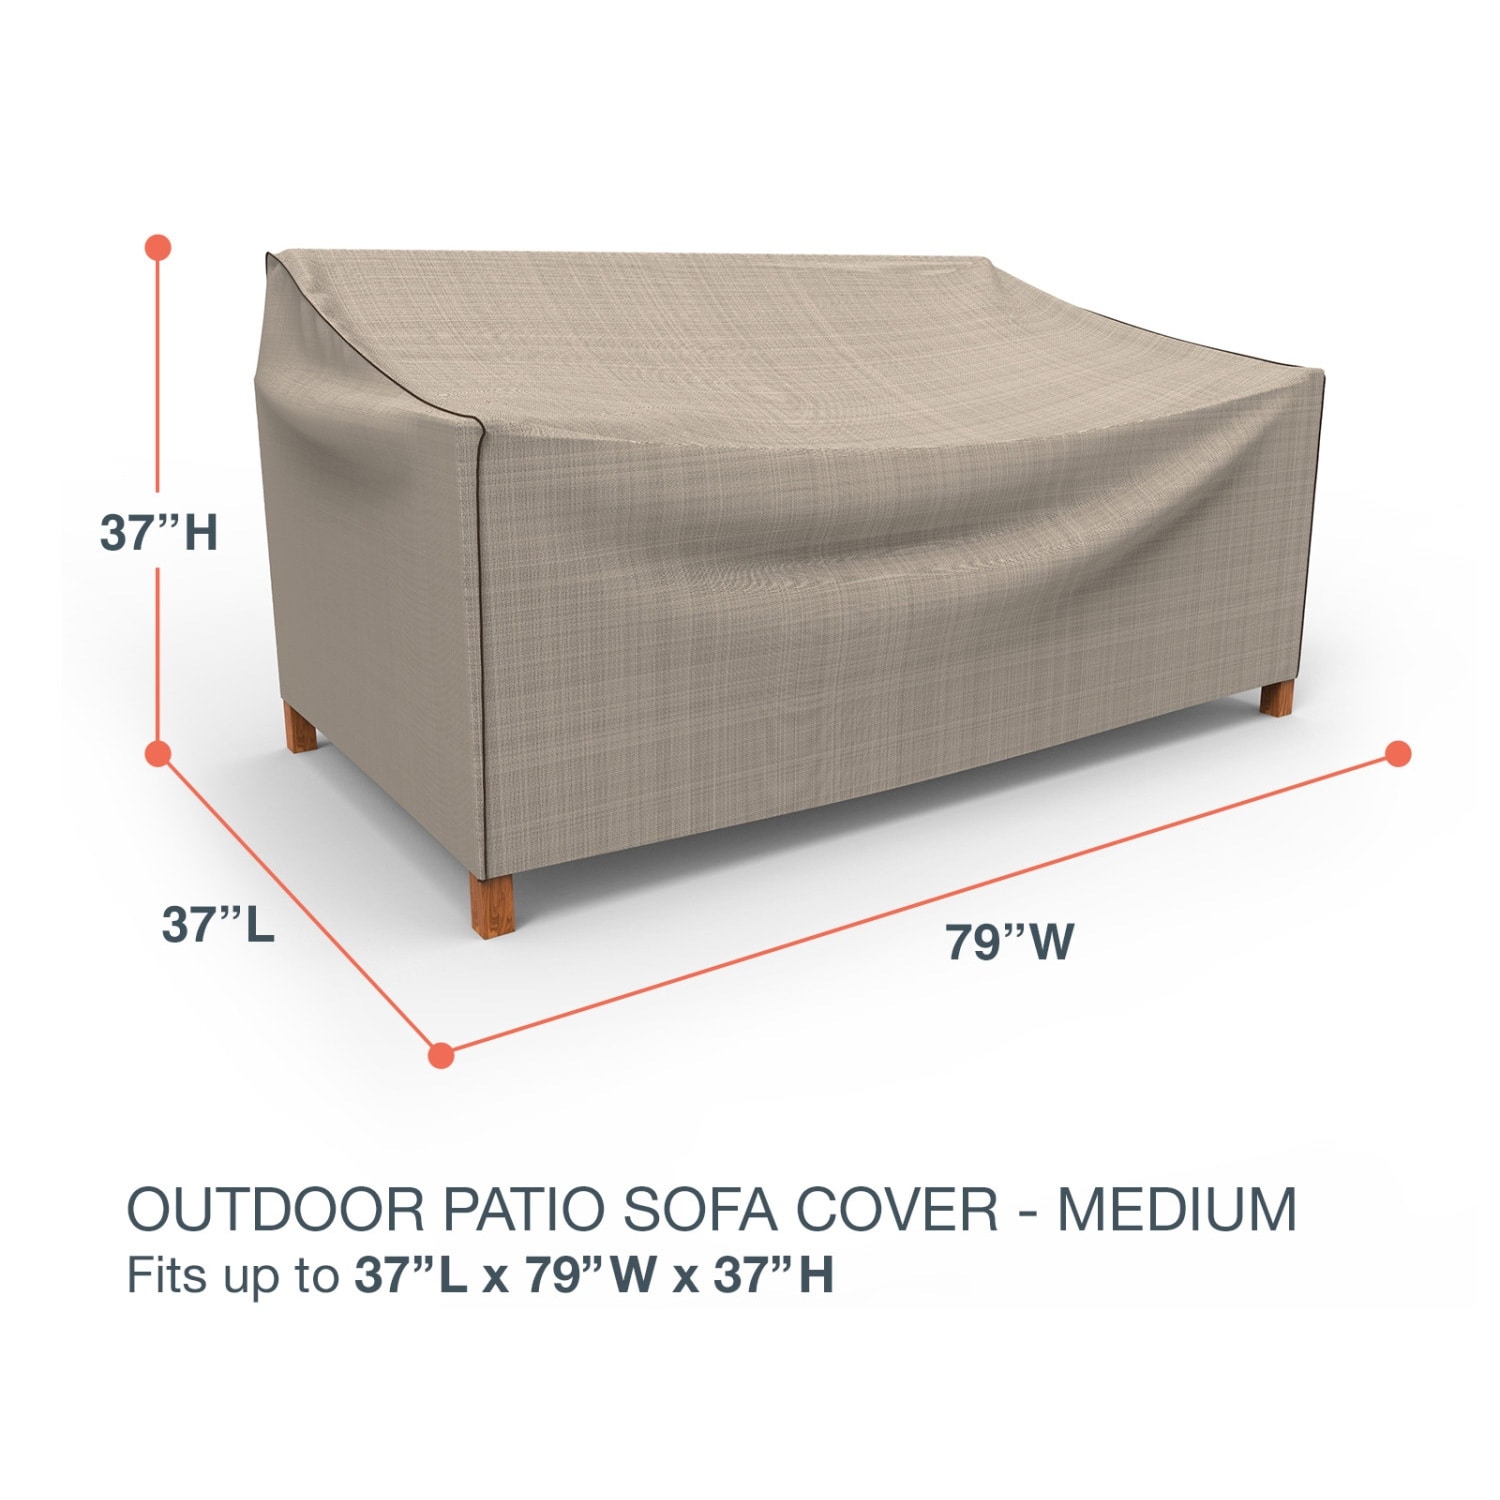 beeyuk Garden Patio Sofa Cover Waterproof,Snowproof,Anti-mould and Moisture Lawn Patio UV Resistant Dustproof Furniture Cover 